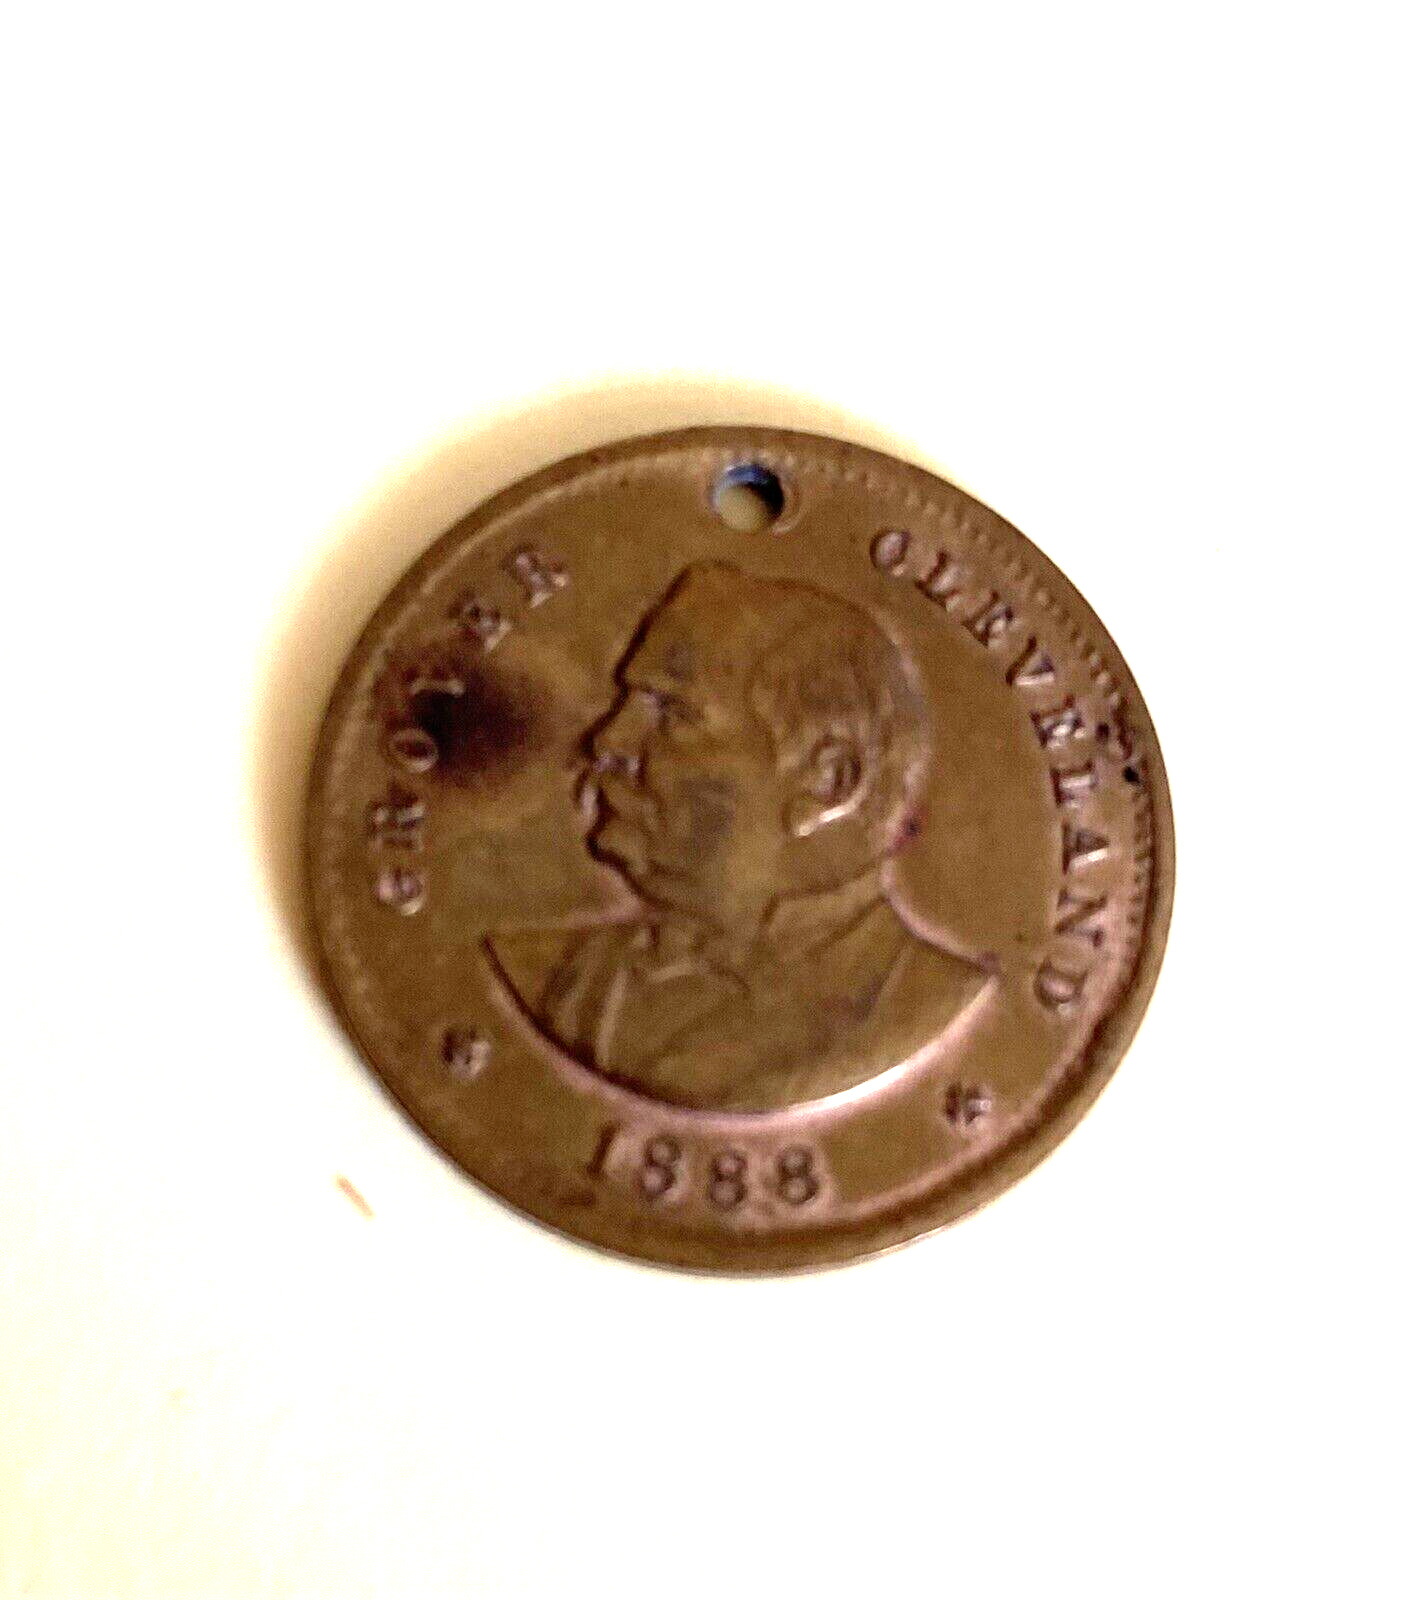 Grover Cleveland Democratic Campaign Token for President 1888